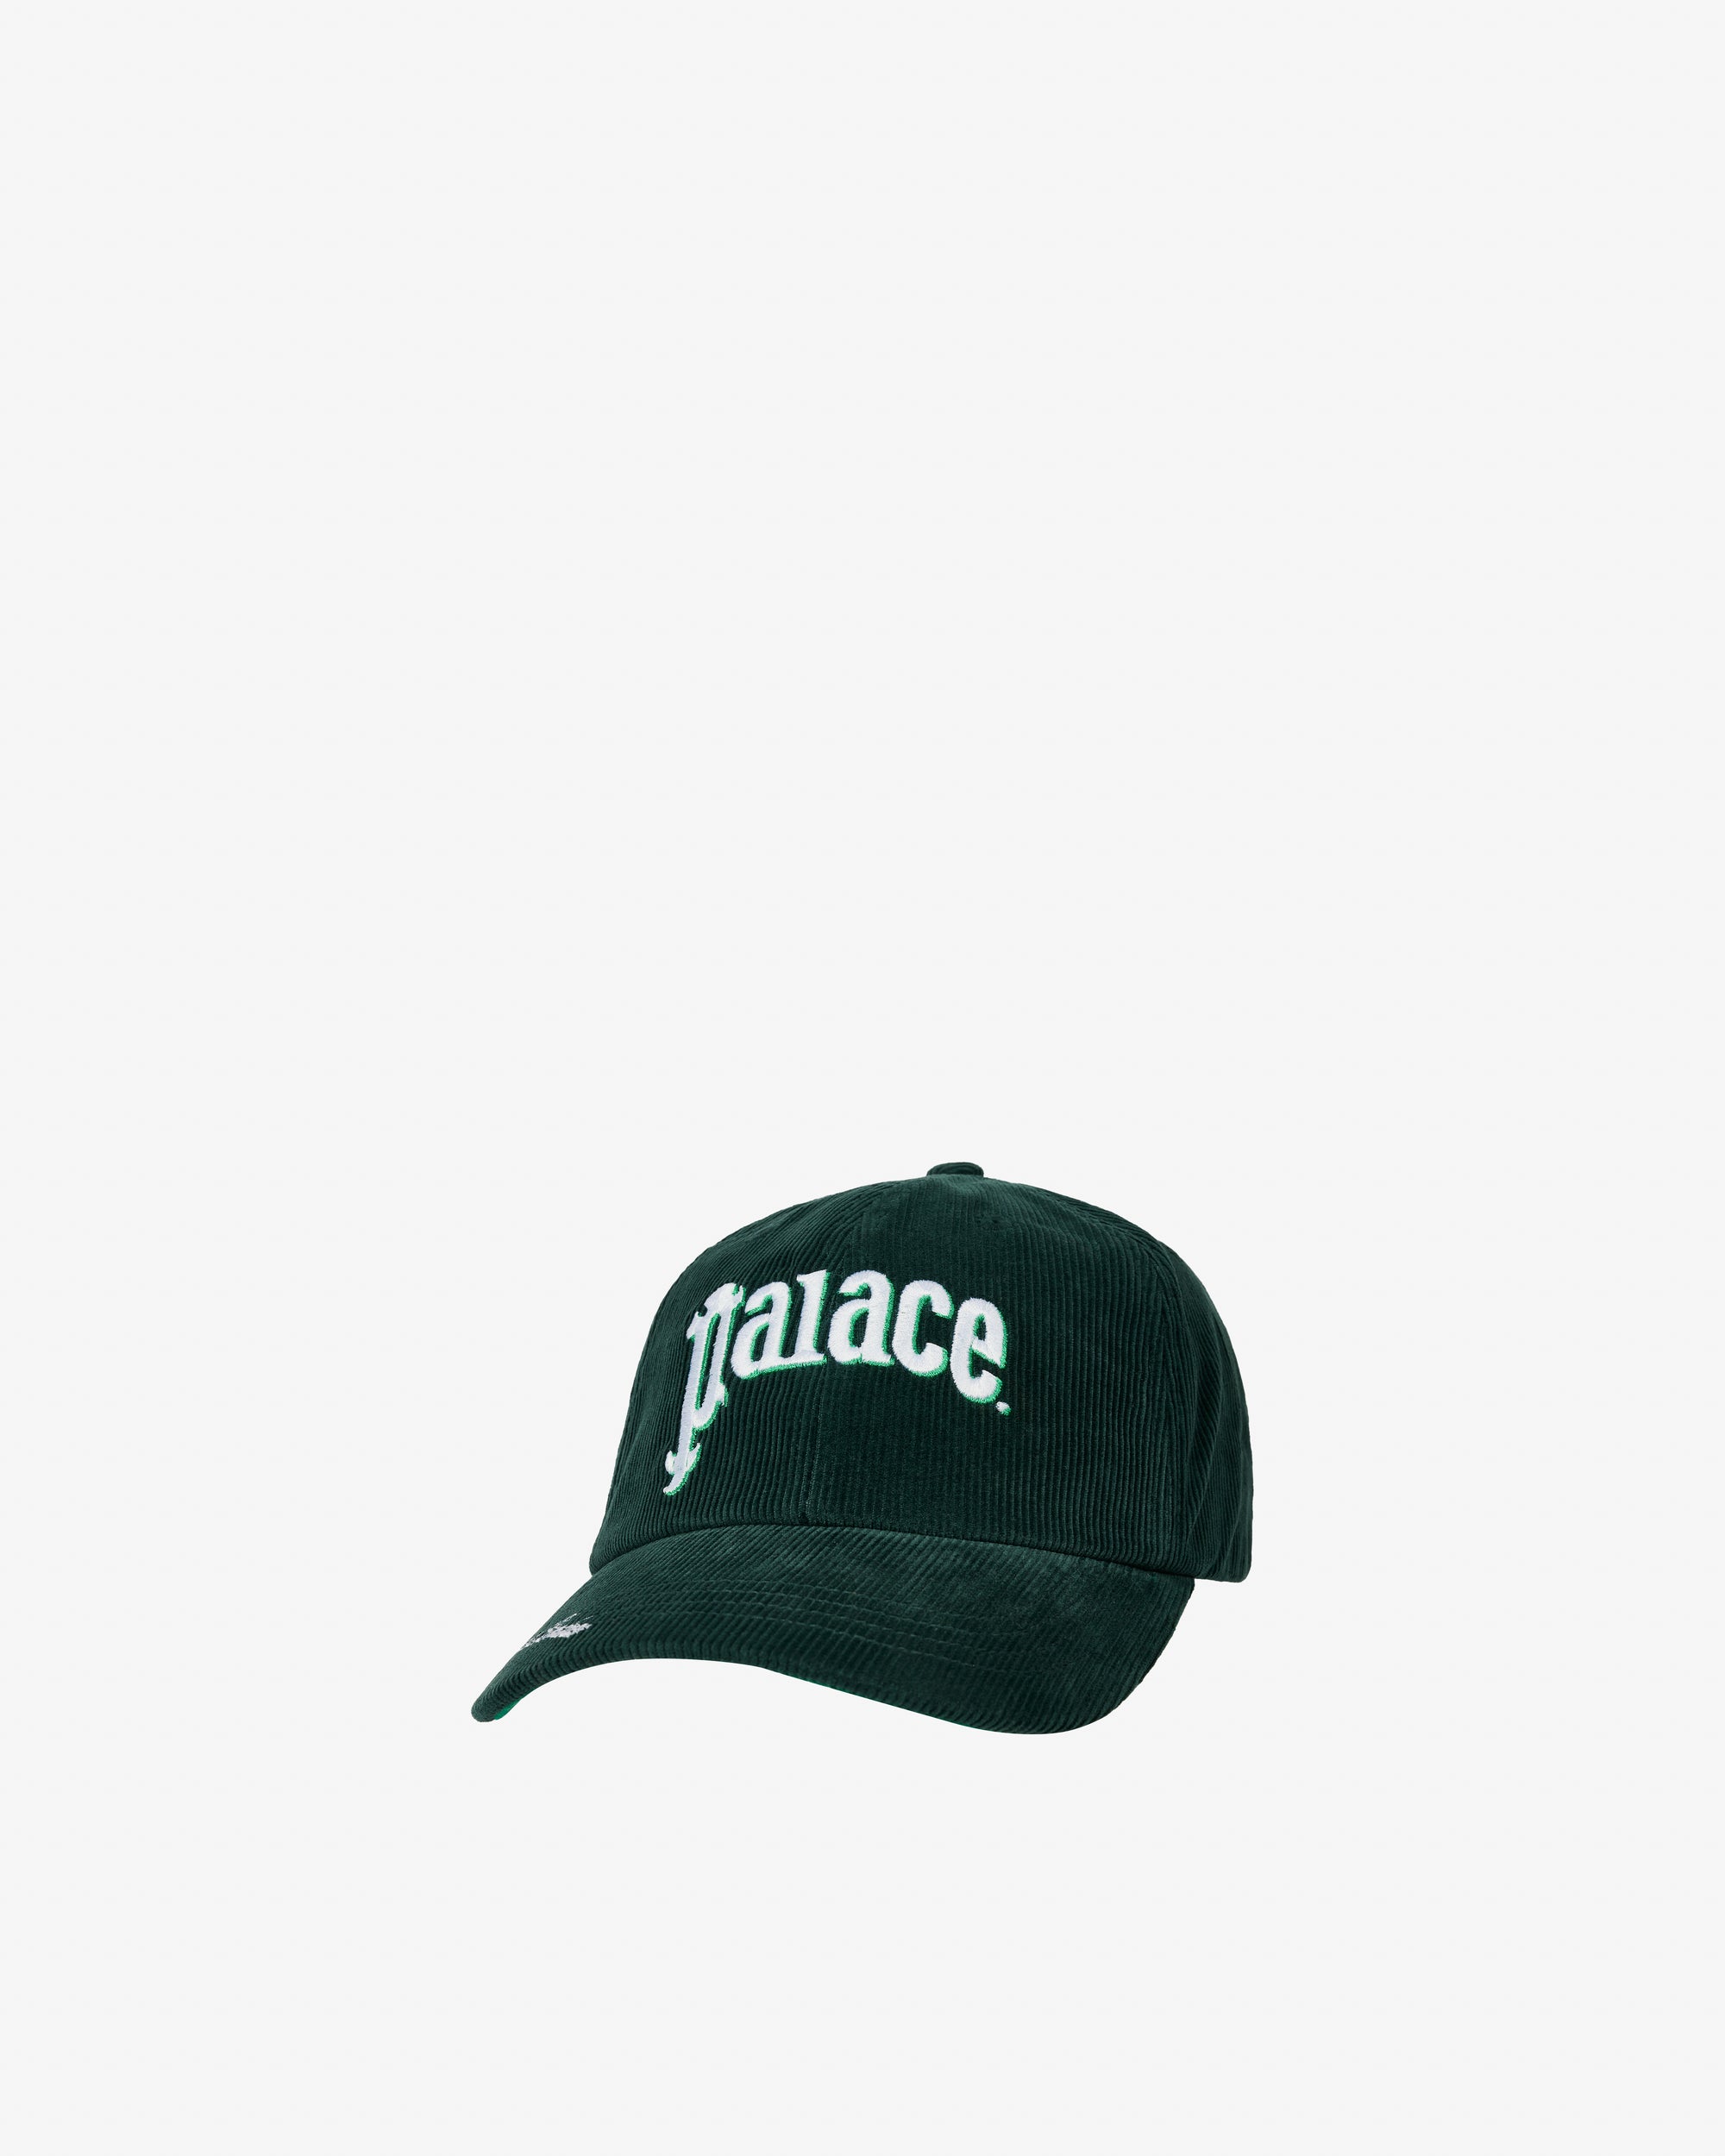 Palace - Men's Gassy 6-Panel - (Green) view 1